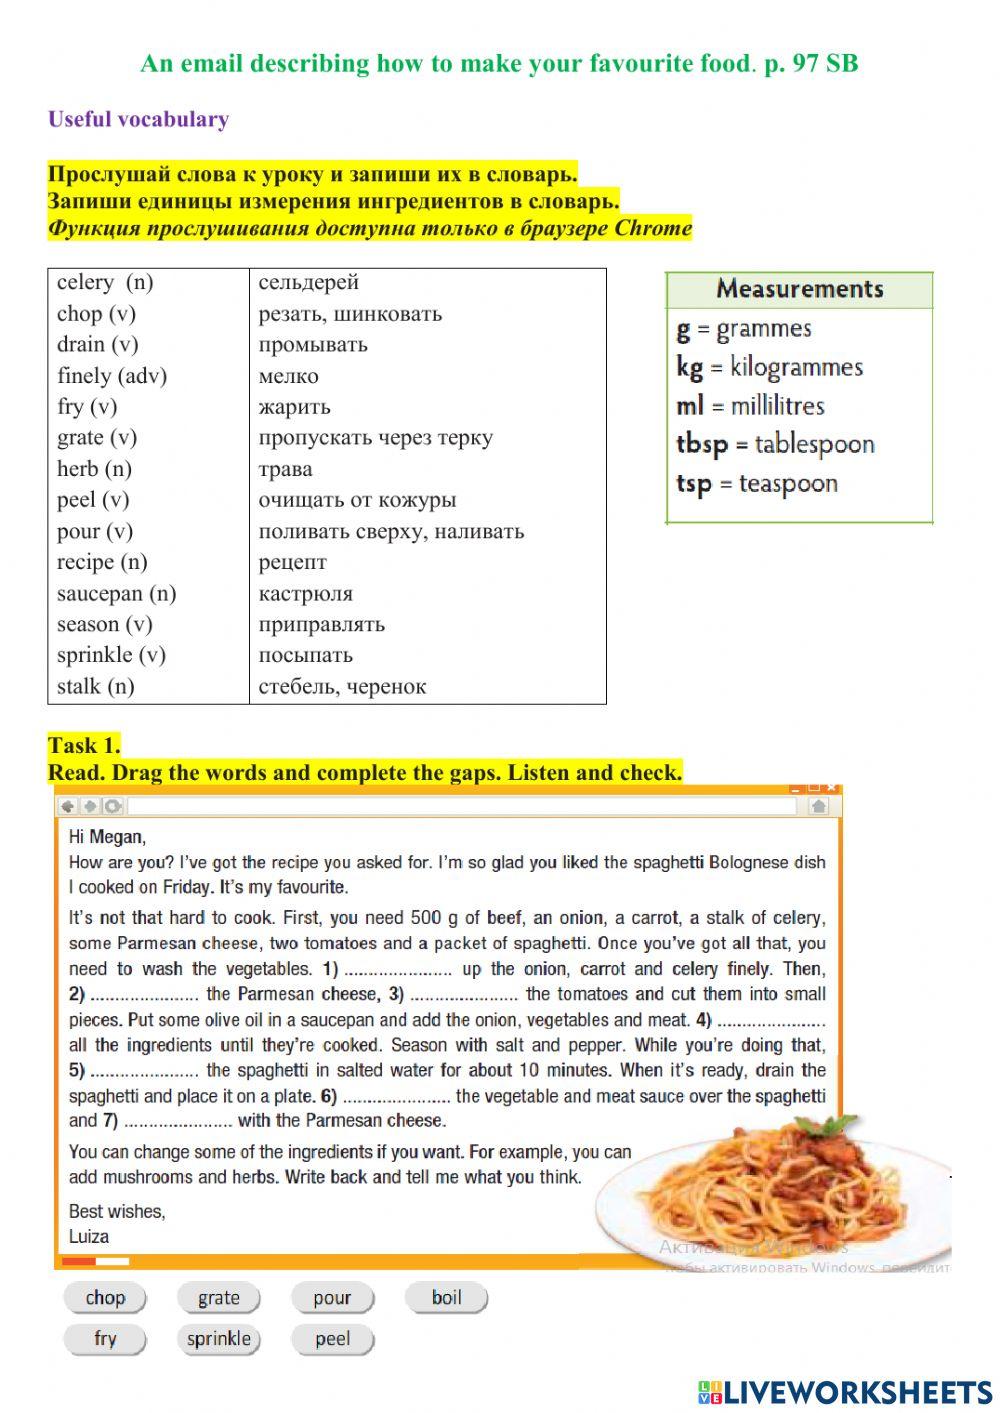 An email describing how to make your favourite. p. 97 SB